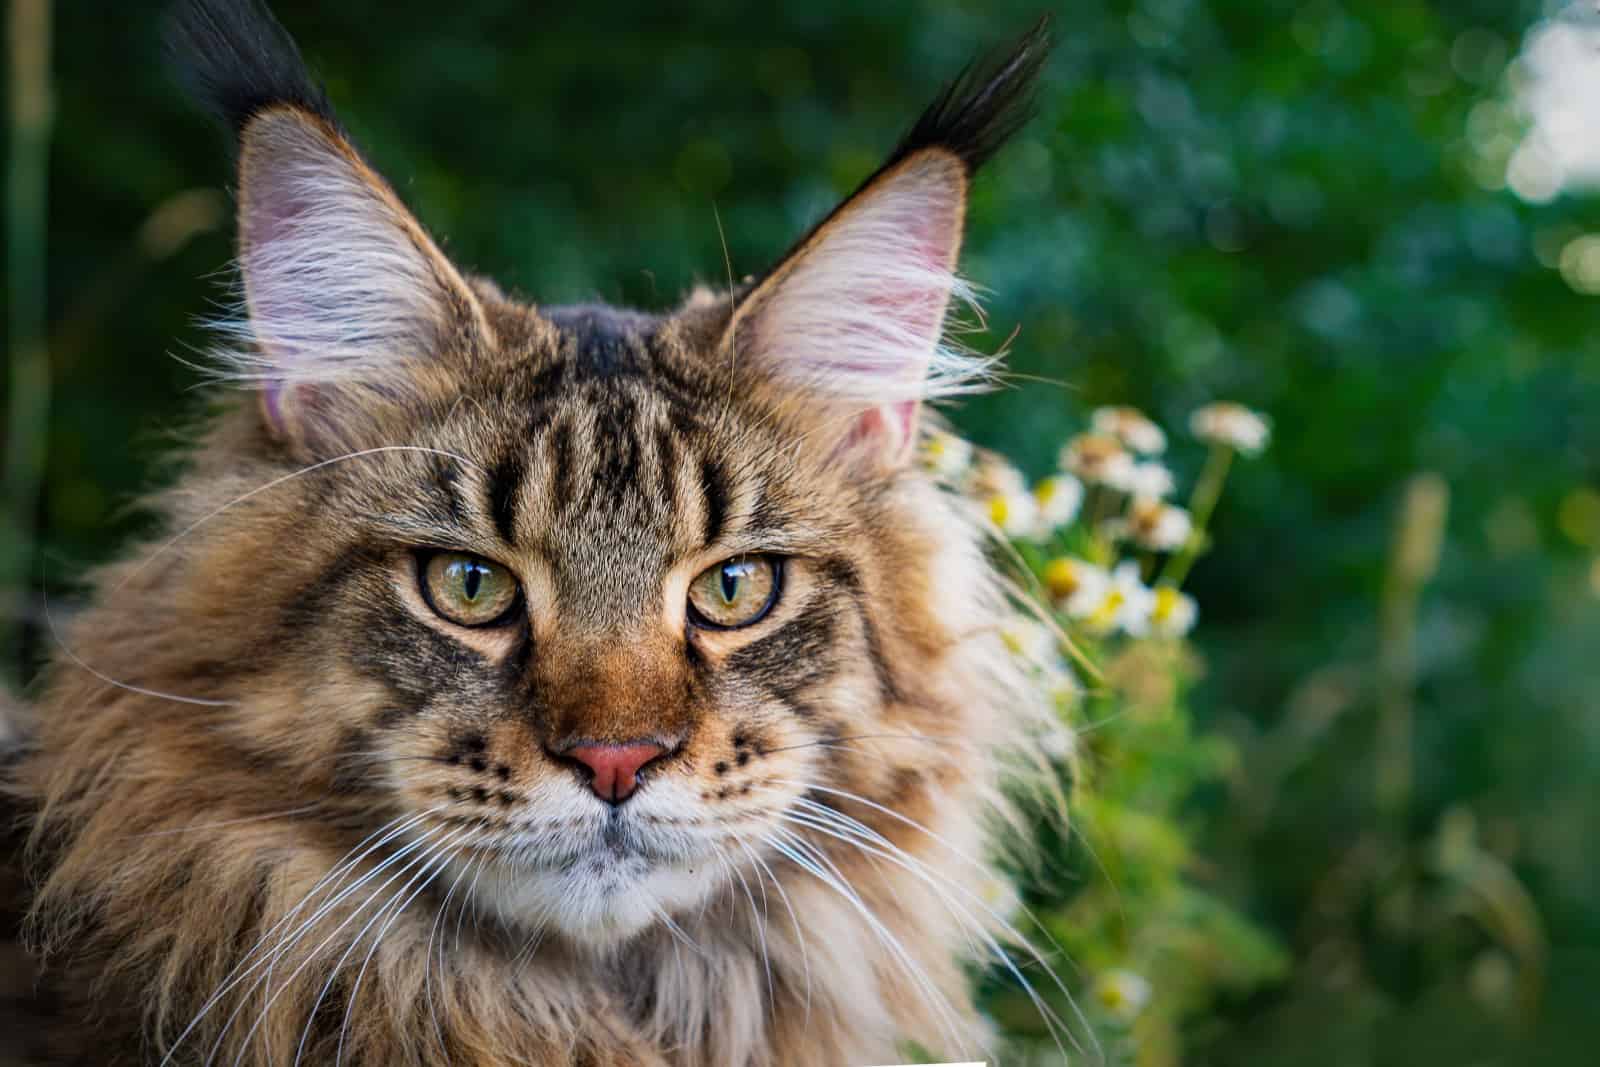 A large outdoors portrait of a sitting calm and serious furry Maine Coon American cat looking at camera